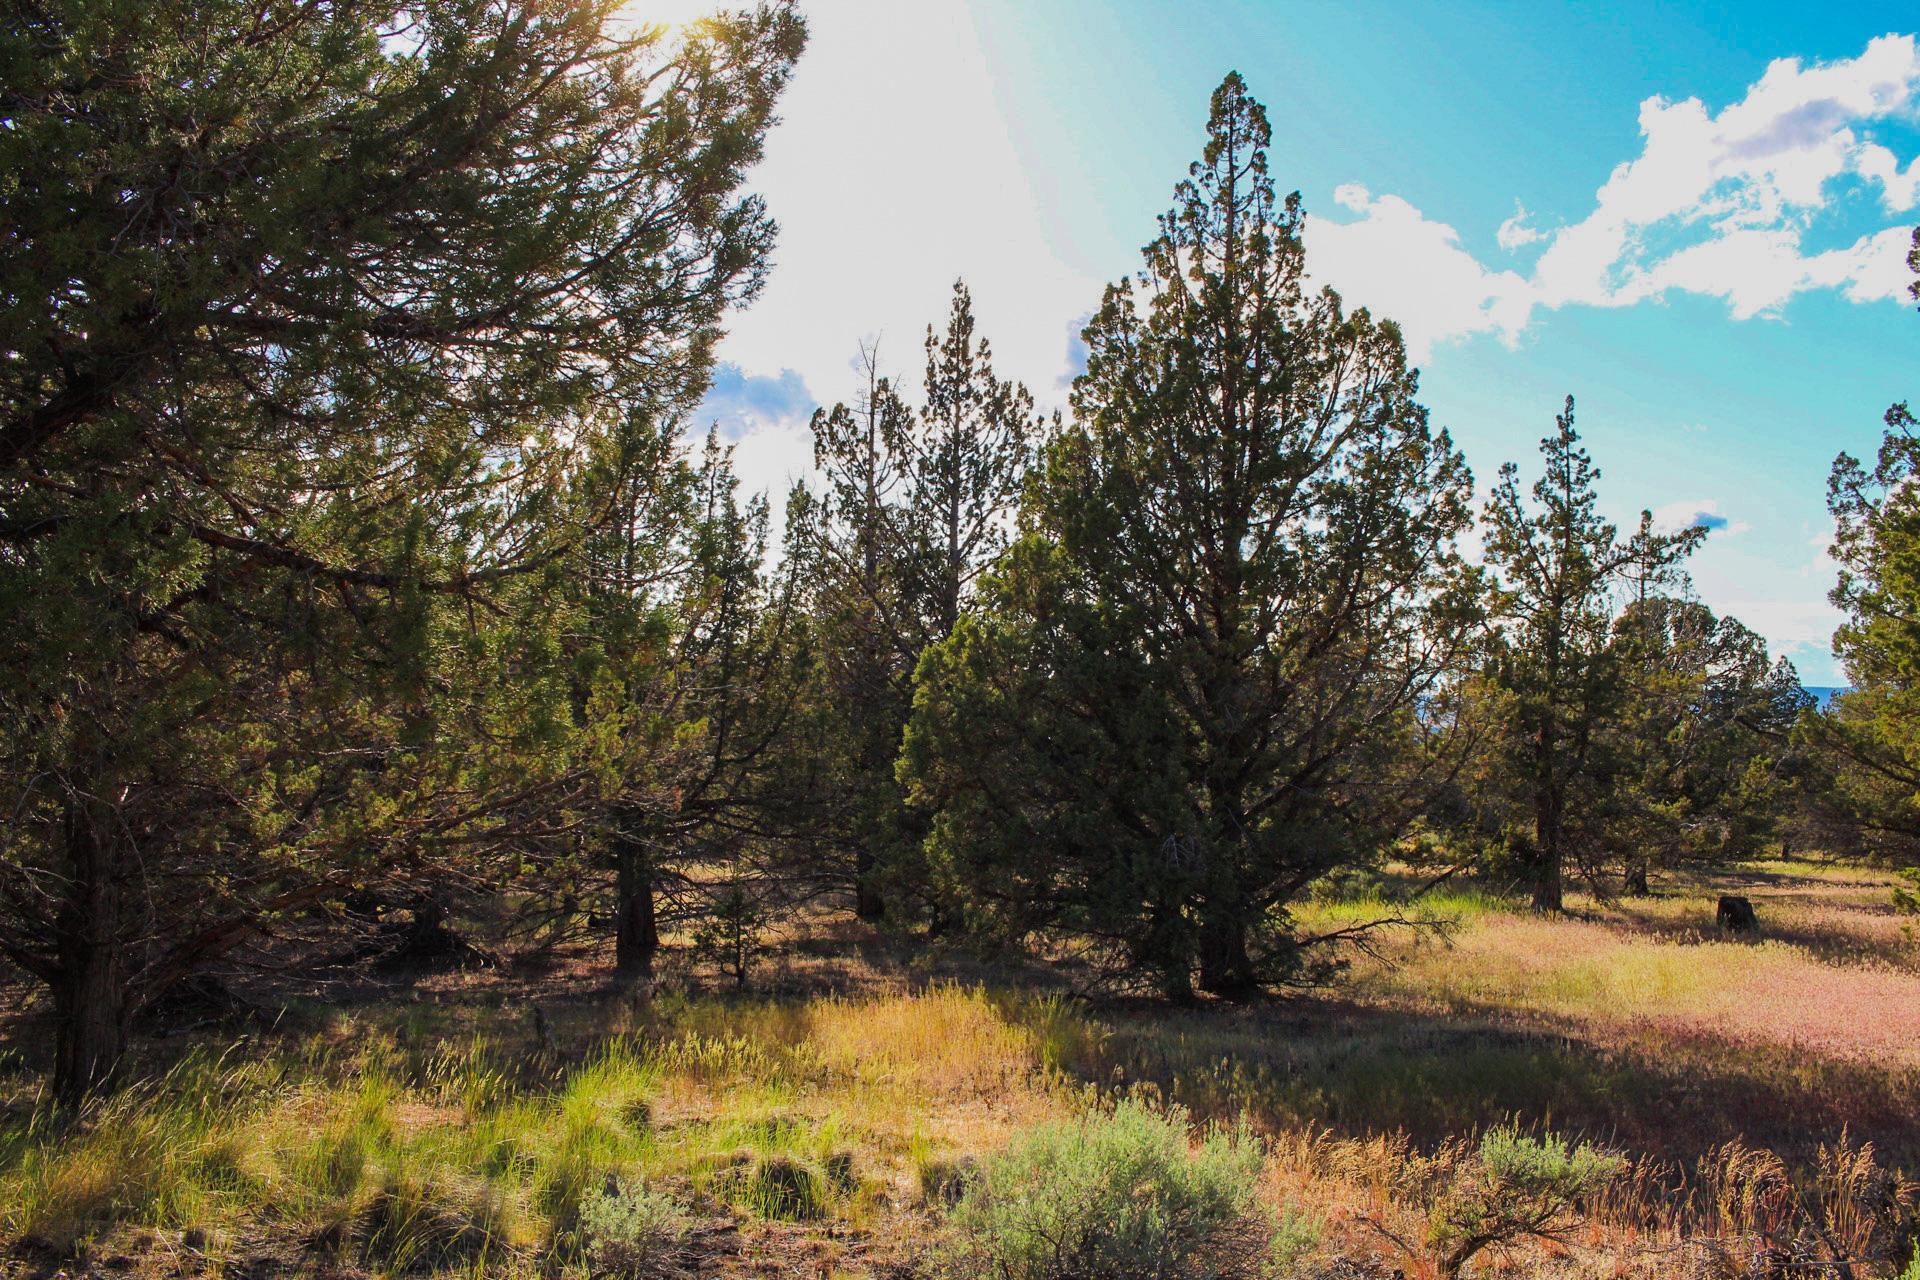 Camp or Build in this Pine Forest in Peaceful & Uncrowded California Pines, Modoc County, CA!